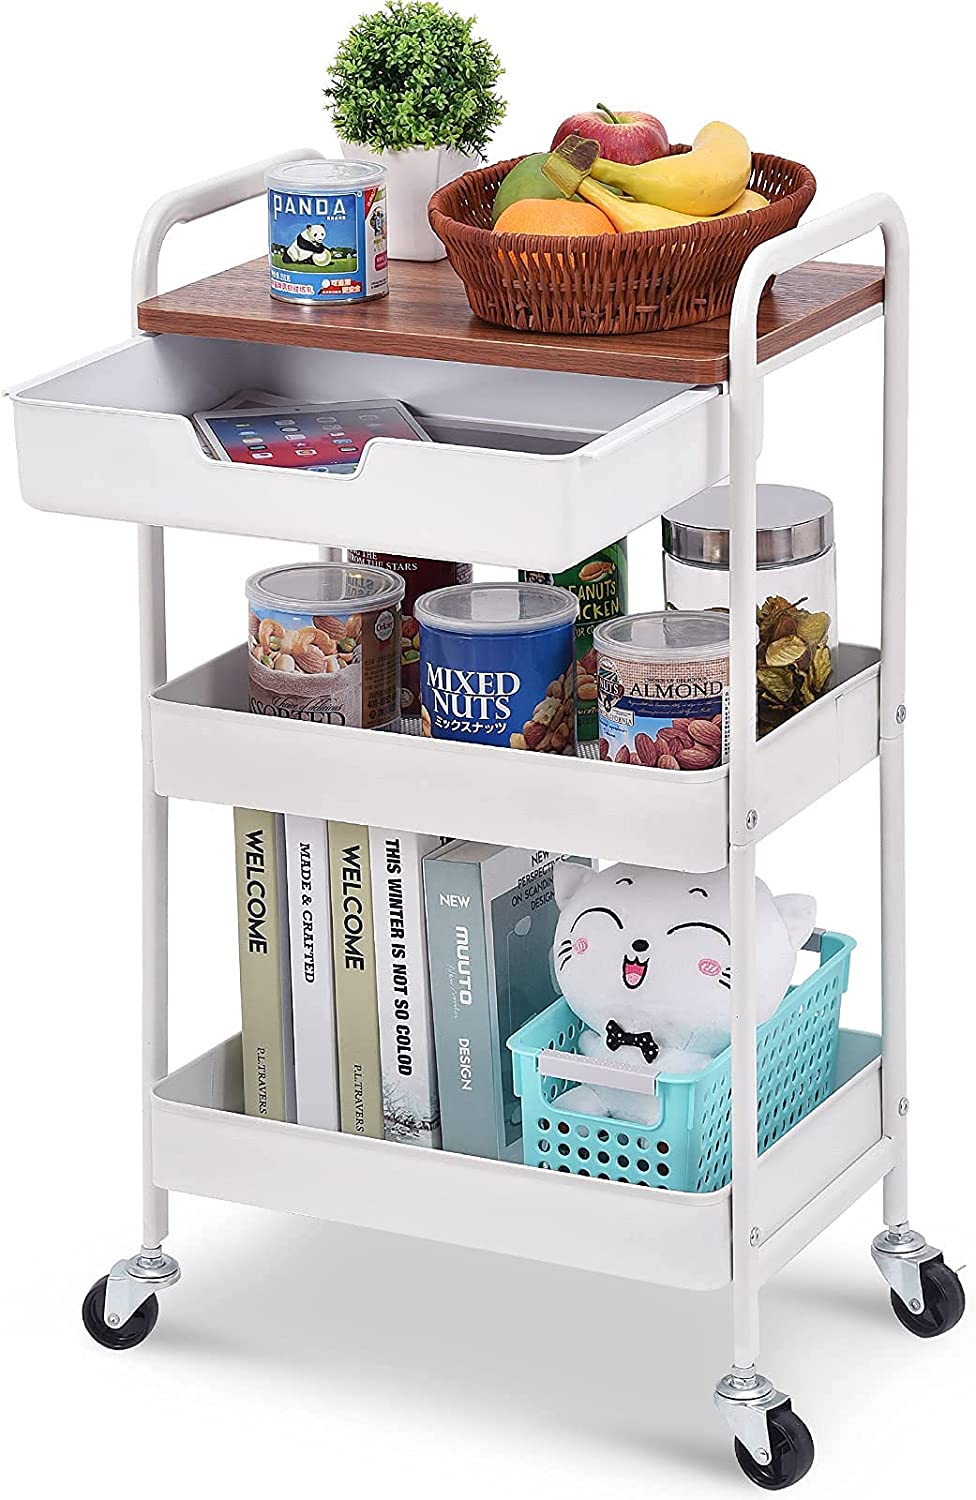 KINGRACK 3-Tier Utility Rolling Cart with Wooden Board and Drawer, Metal Storage Cart with Handle, White Trolley Kitchen Organizer Rolling Desk with Locking Wheels for Office, Classroom, Home, Bedroom  WK830549